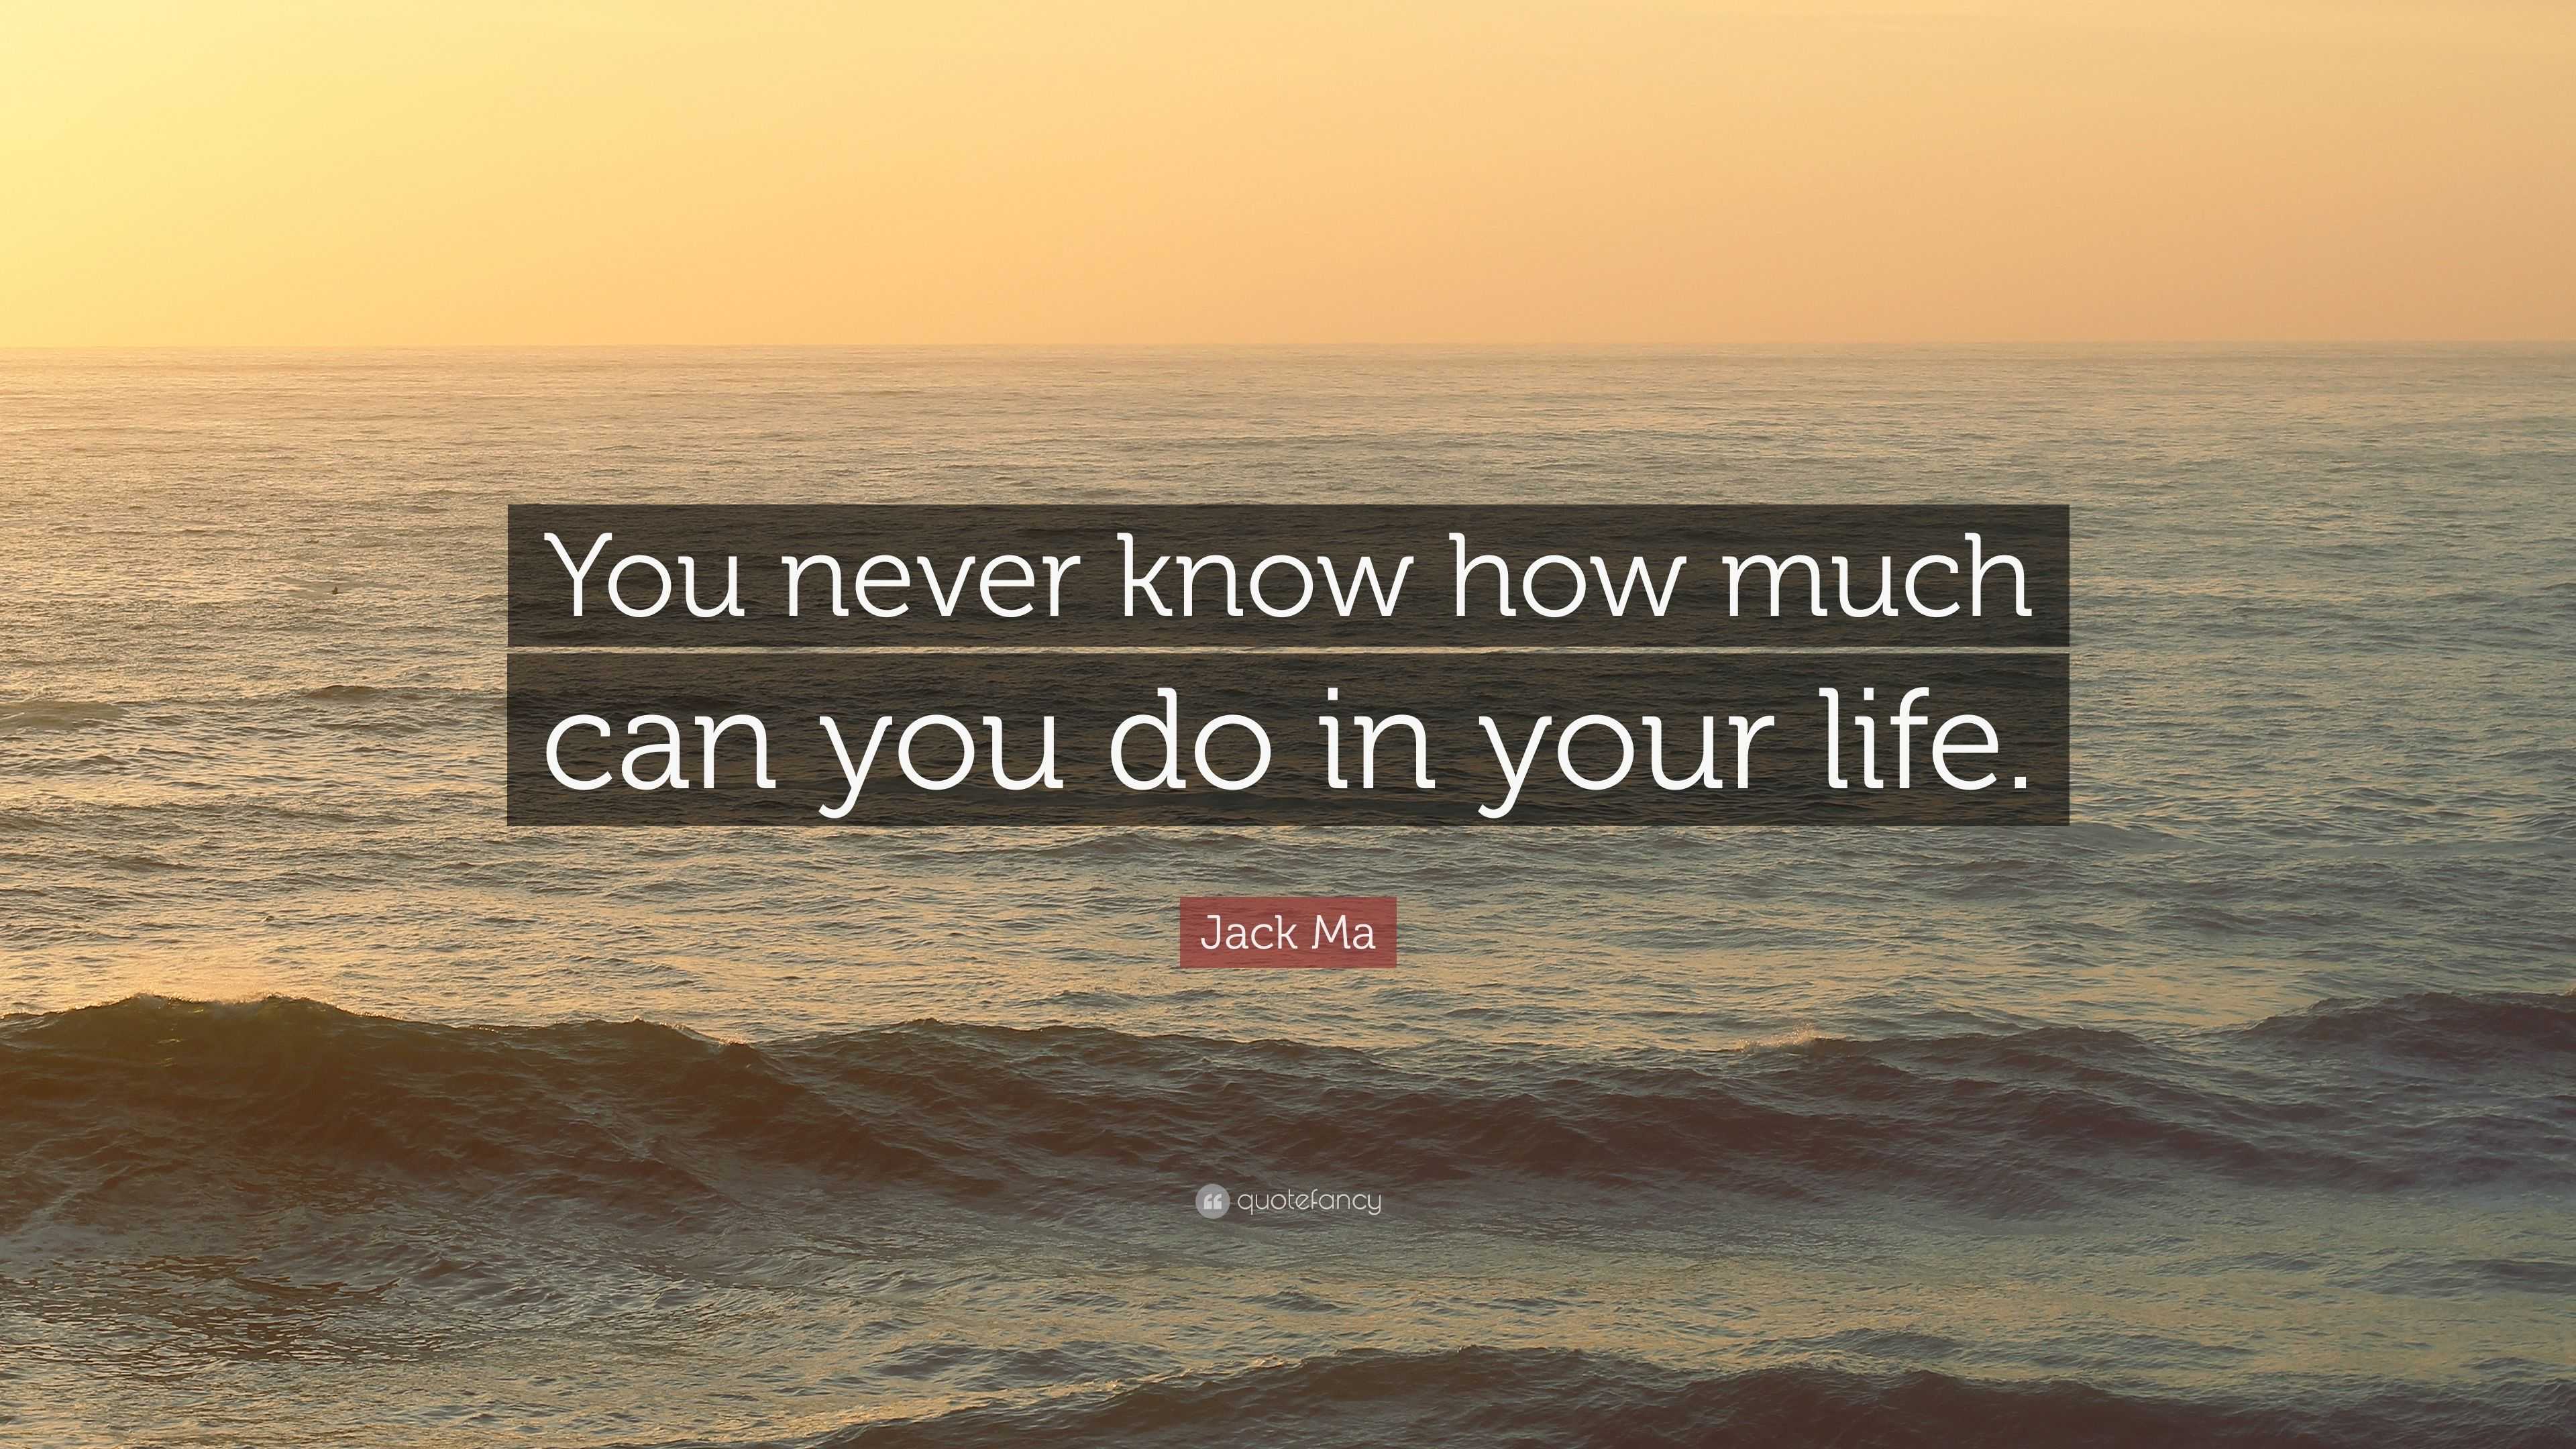 Jack Ma Quote: “You never know how much can you do in your life.”